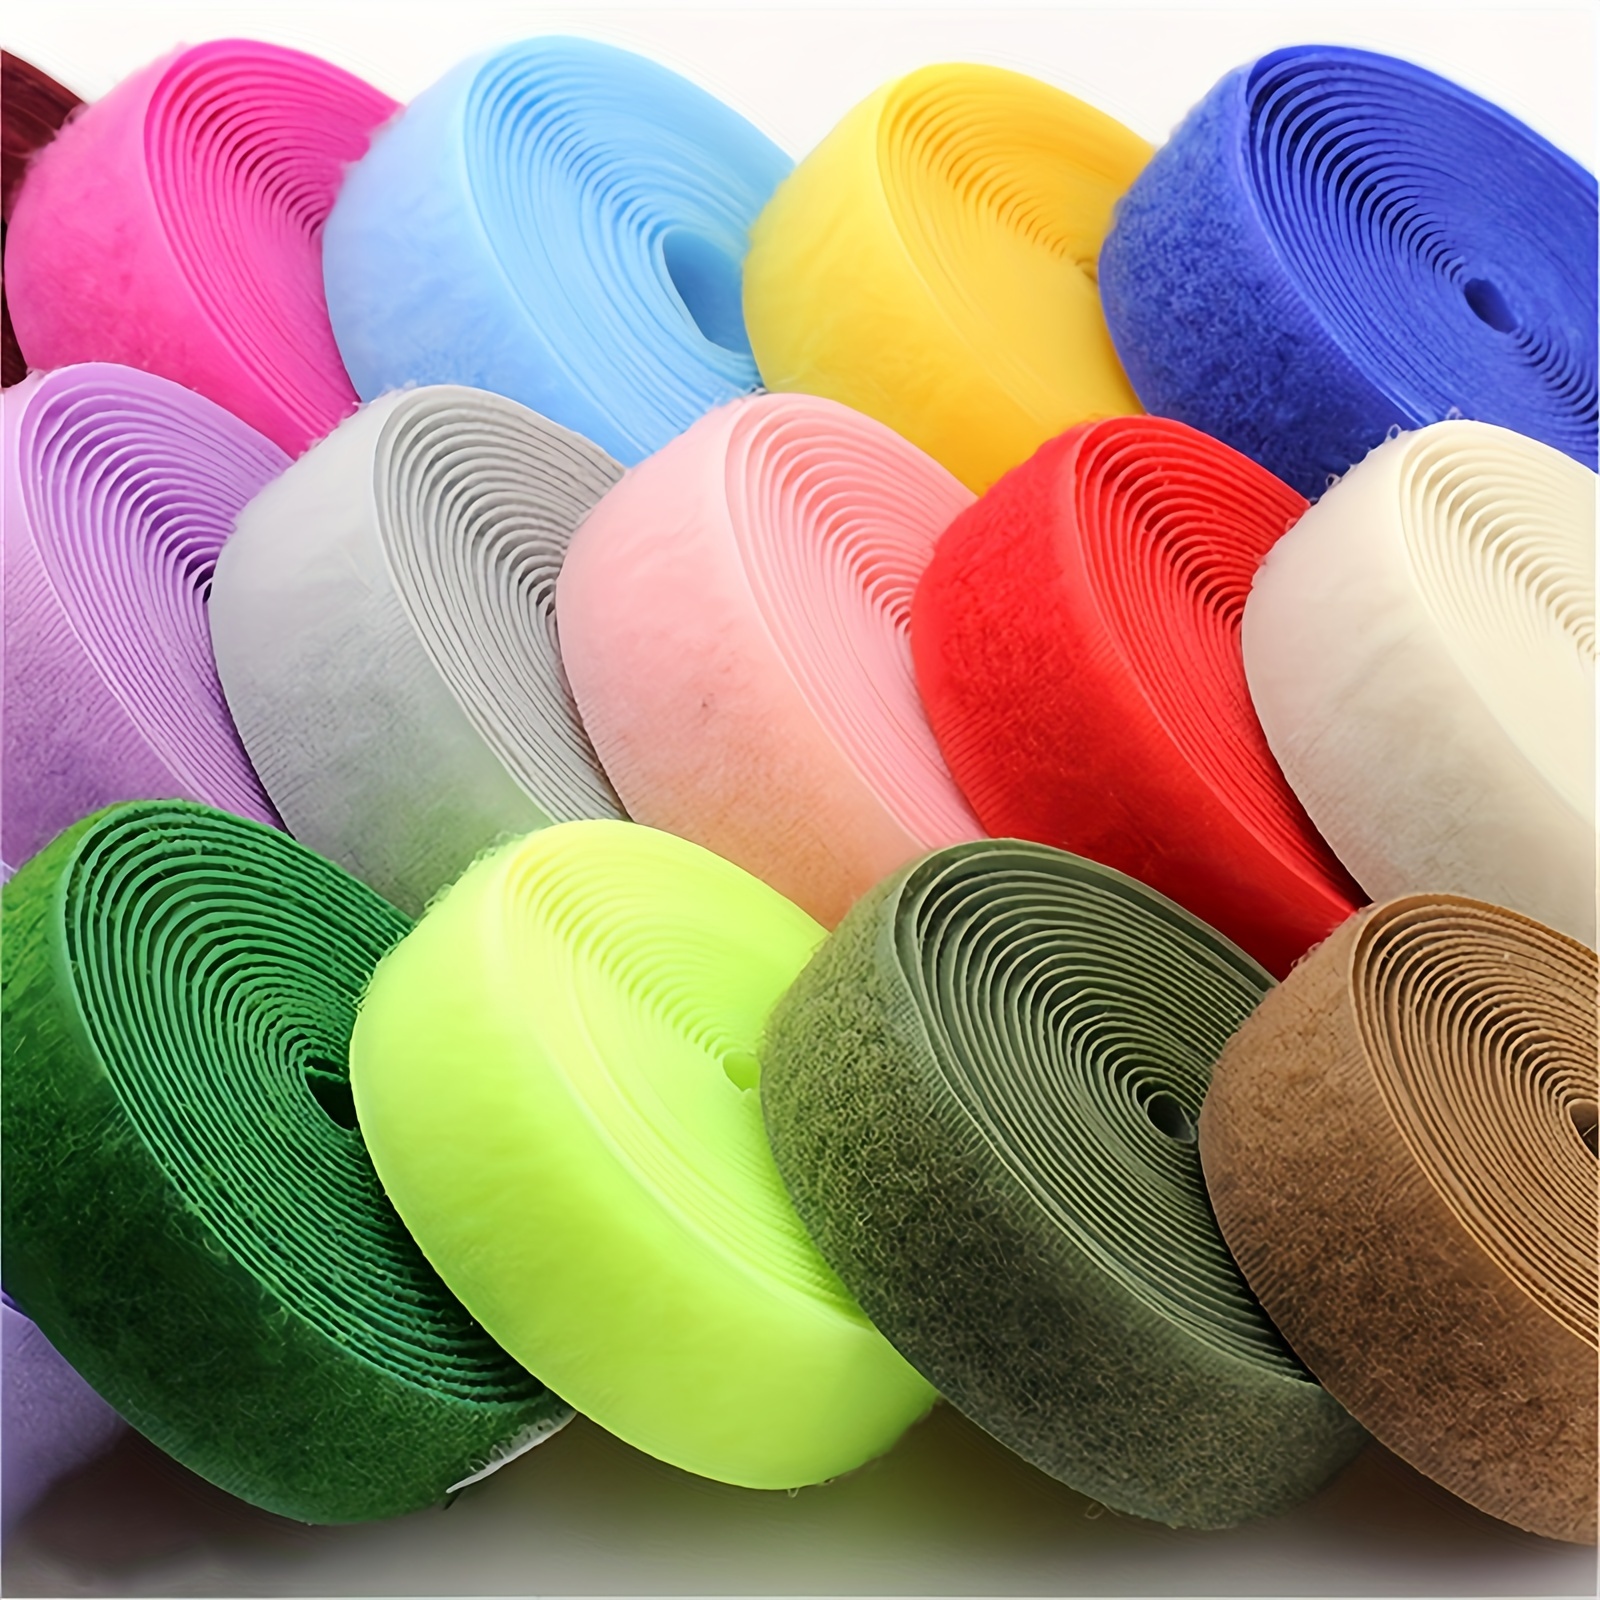 

1 Pair 3yard Hook And Loop Fastener Sew On Snap Nylon Cable Ties Wire Strap Cord No Glue Adhesive Sewing-on Strips Organizer Straps Office Use Wires Diy Decorative Accessories Sewing Accessories